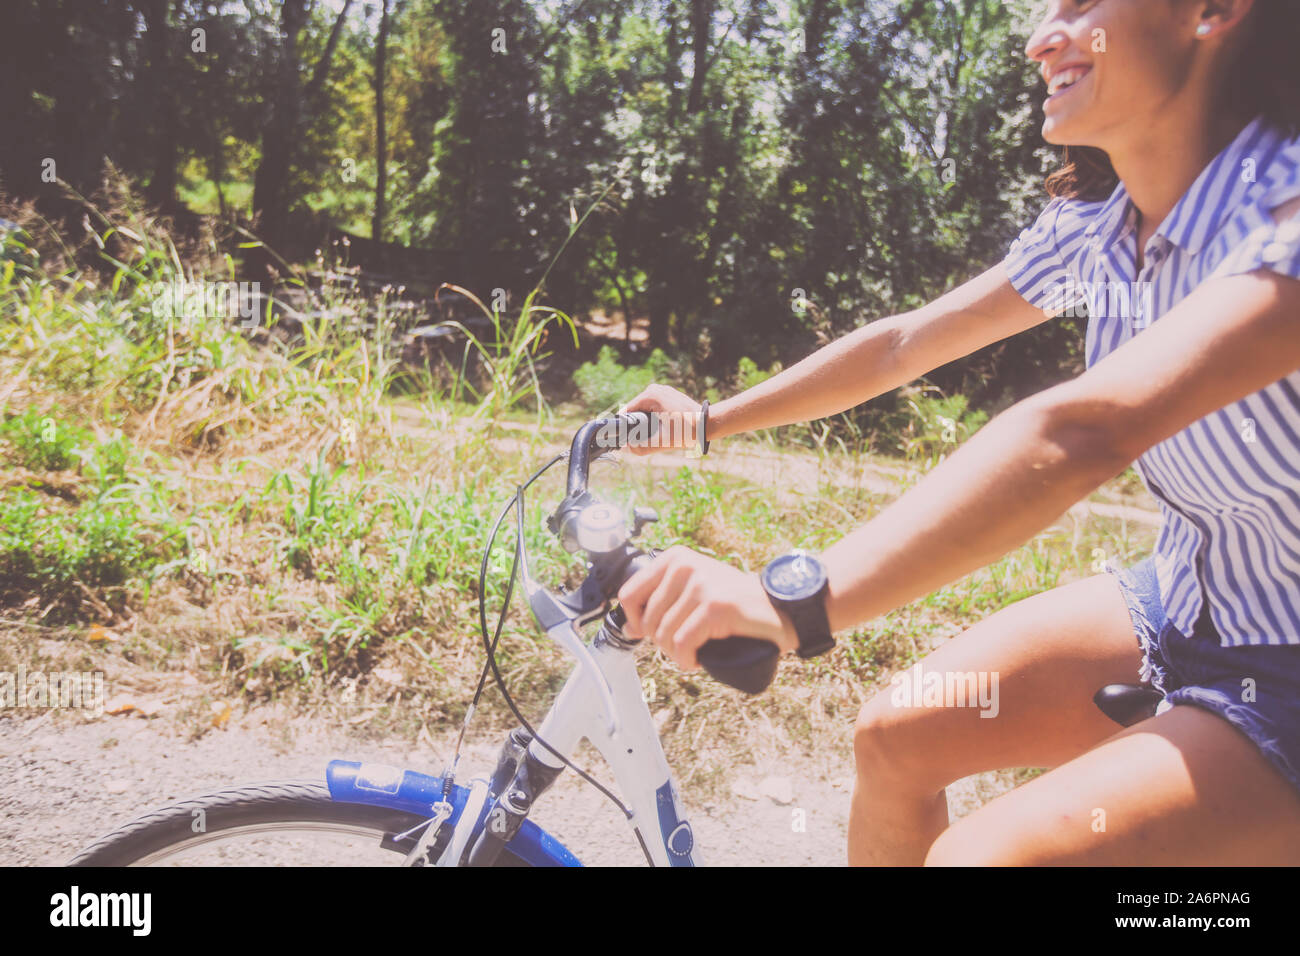 Closeup view of attractive woman in jeans shorts riding bicycle in the ...